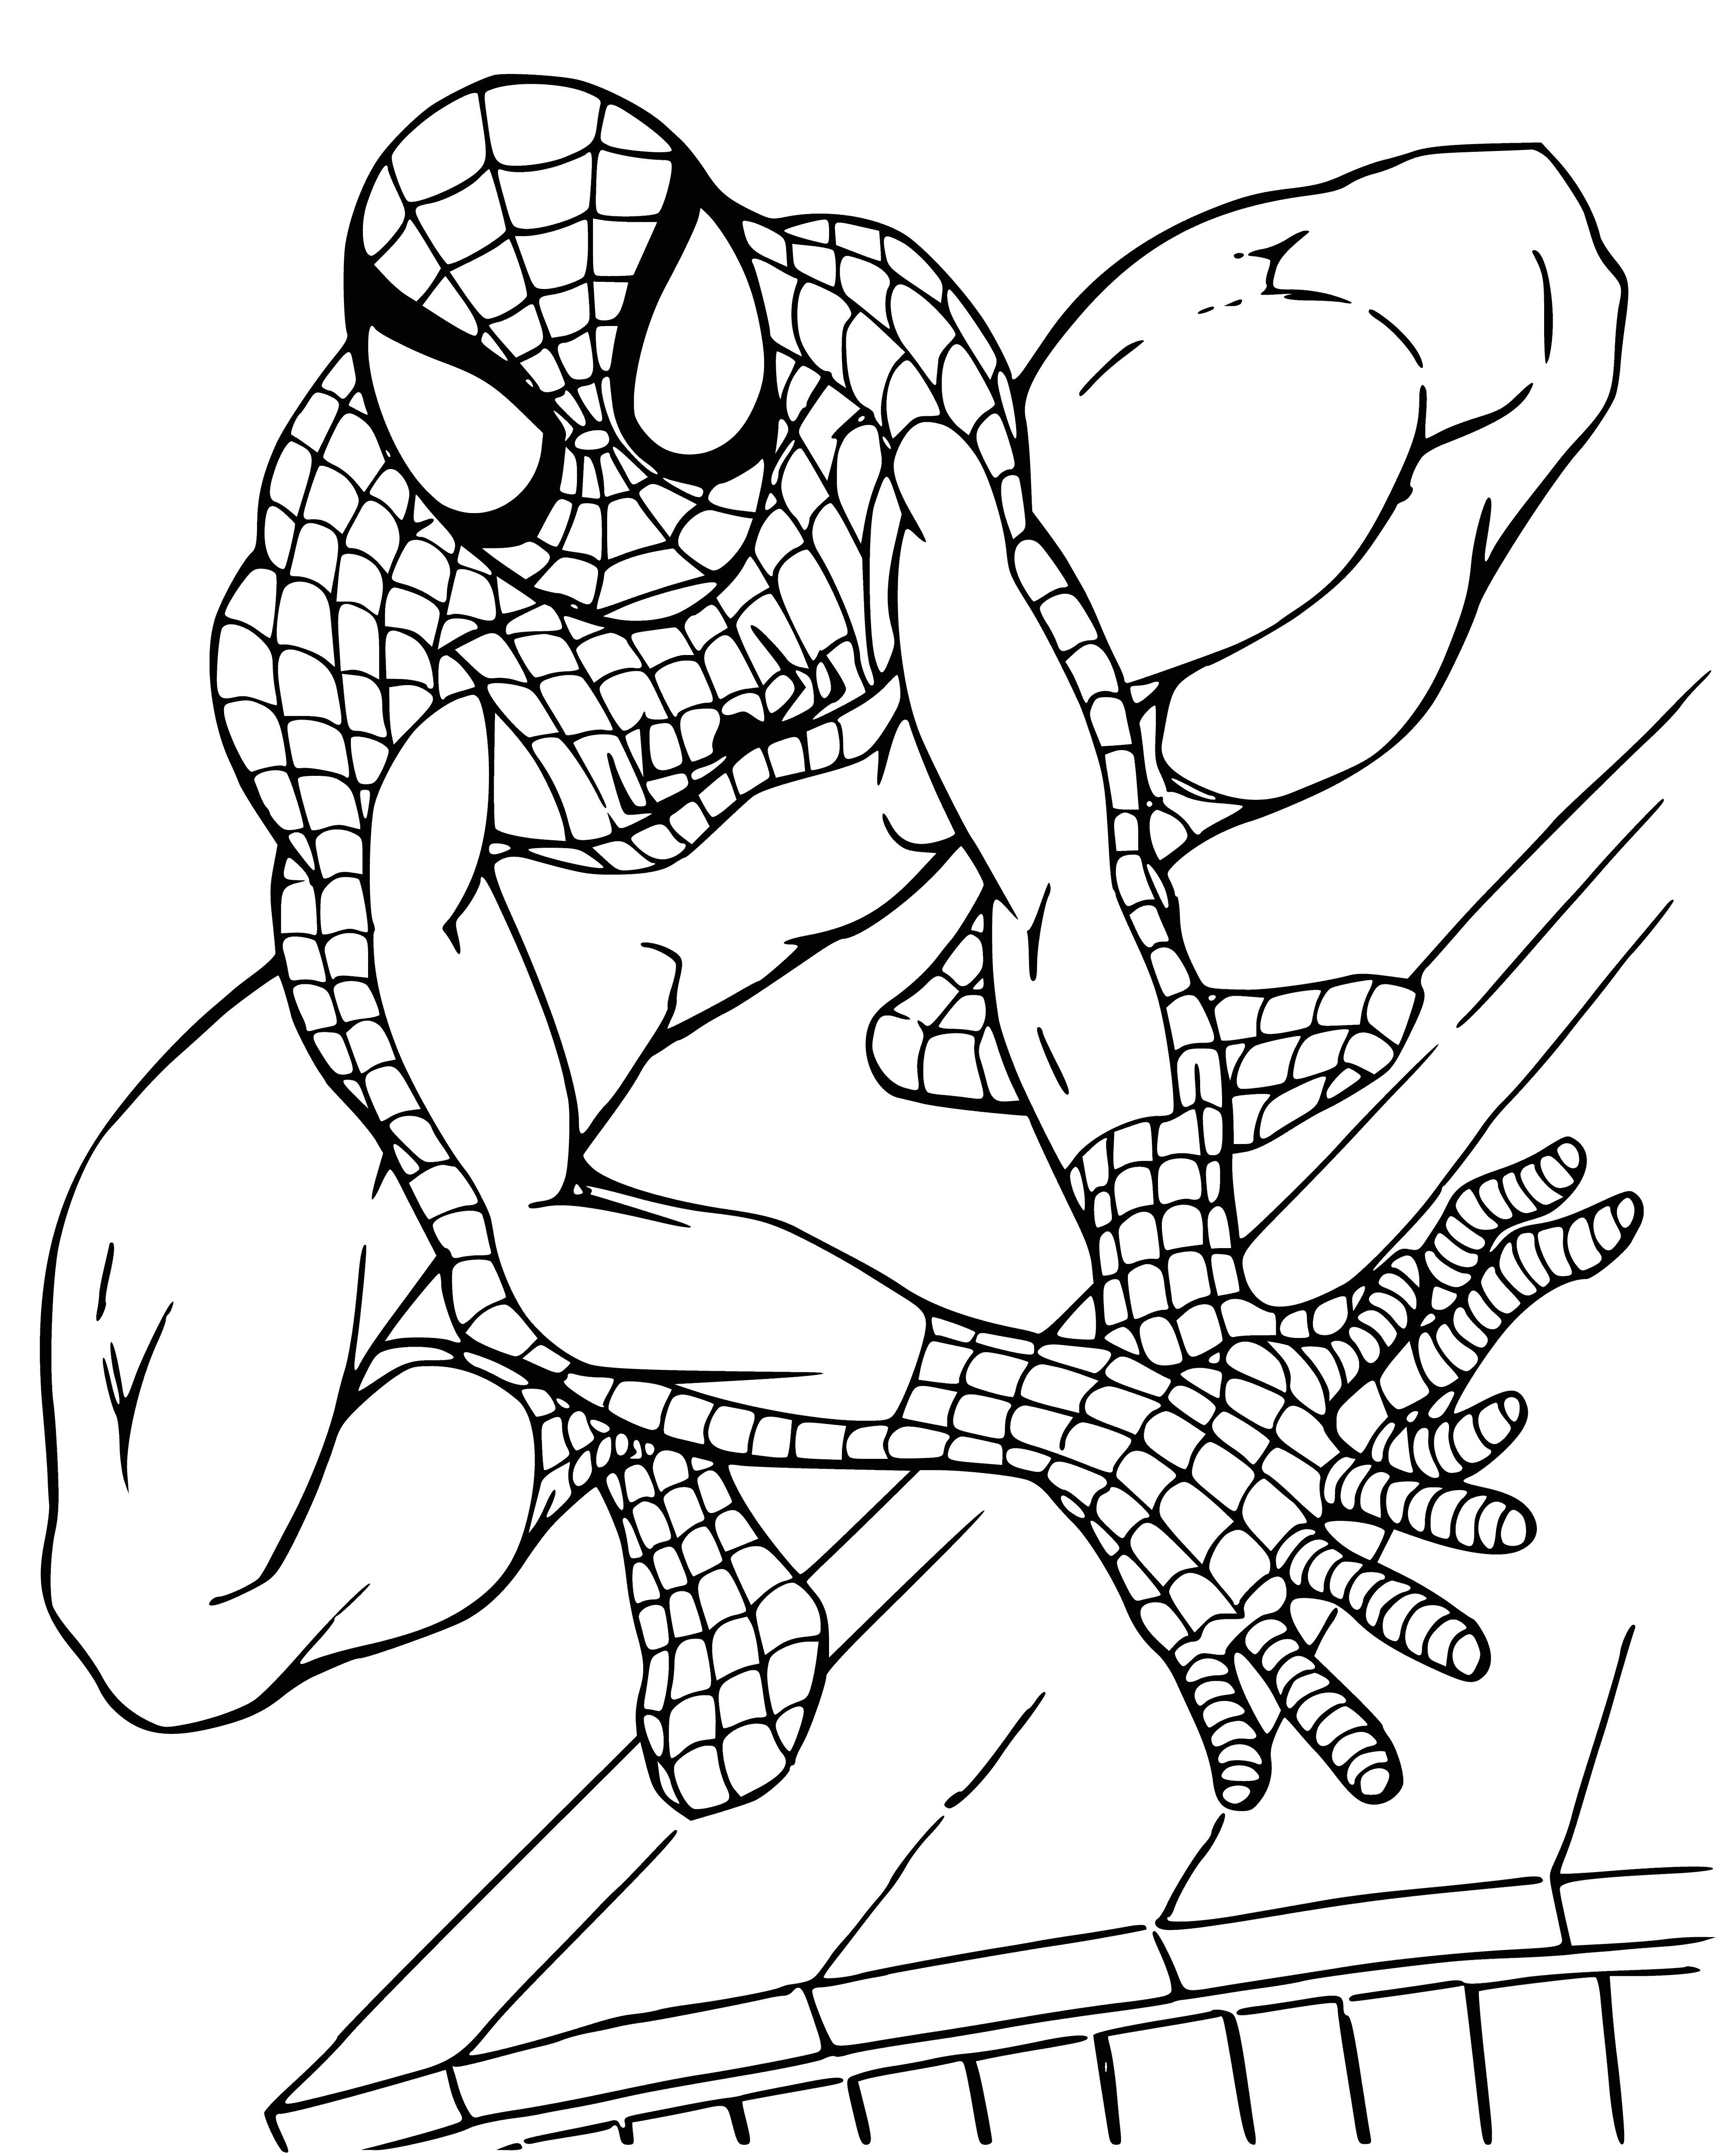 coloring page: Man in red-and-blue suit with spider emblem, black mask, head in hands on bench in city - something's not right.